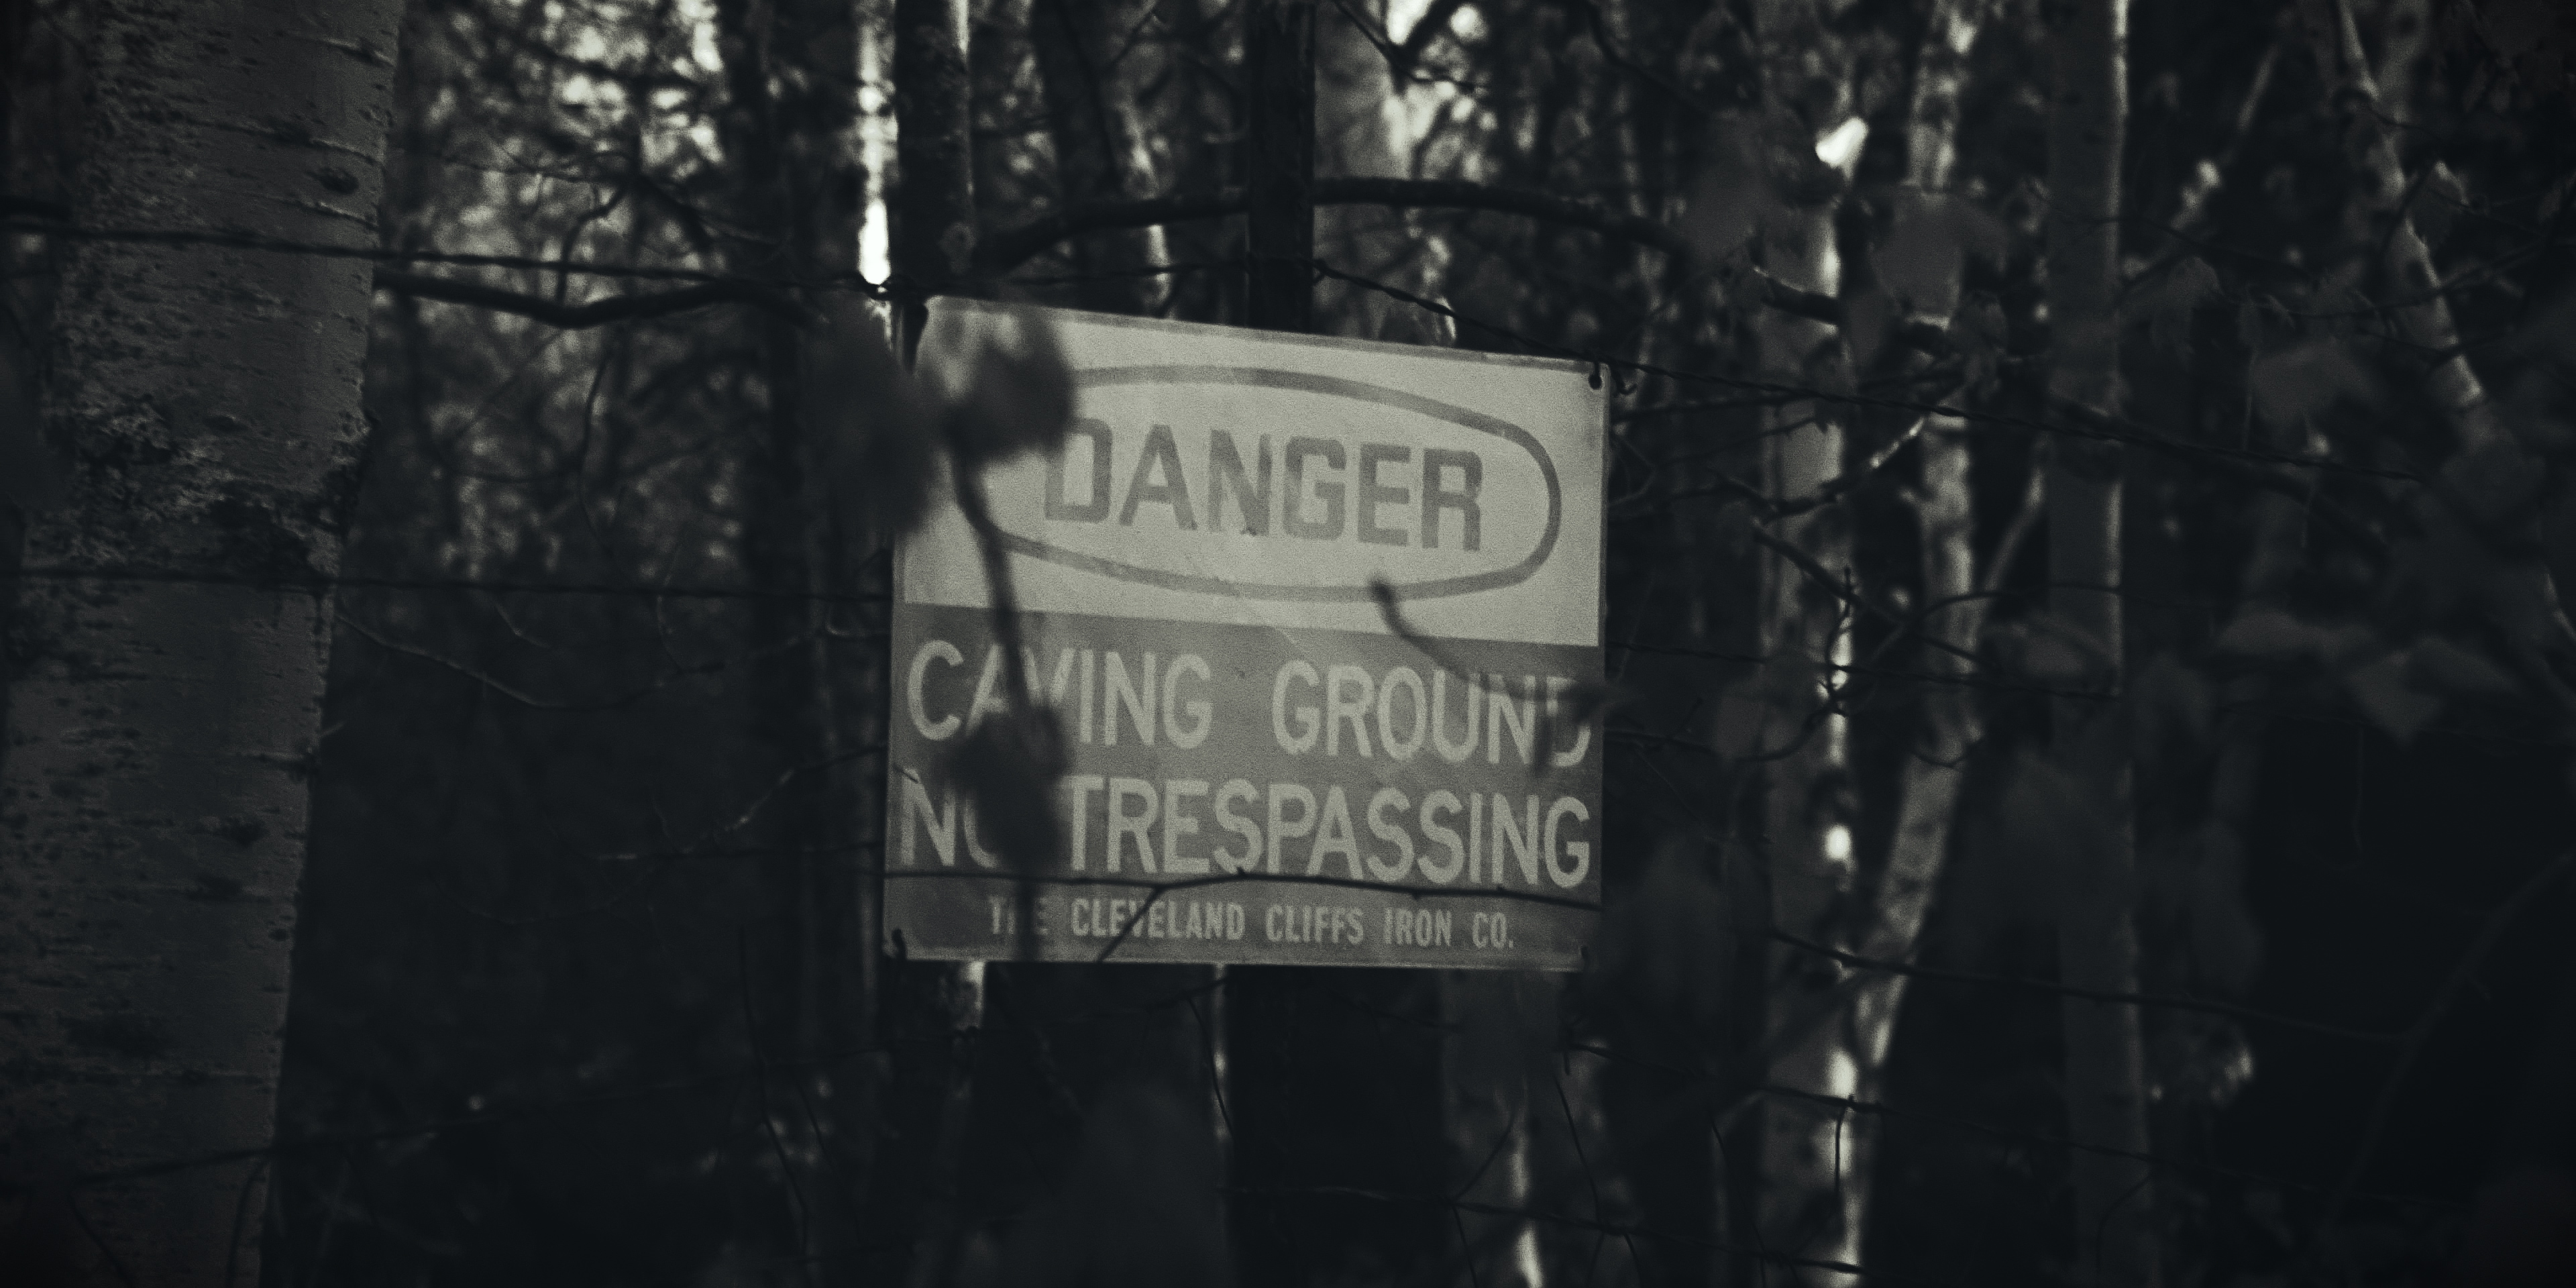 A warning sign posted at the caving grounds.